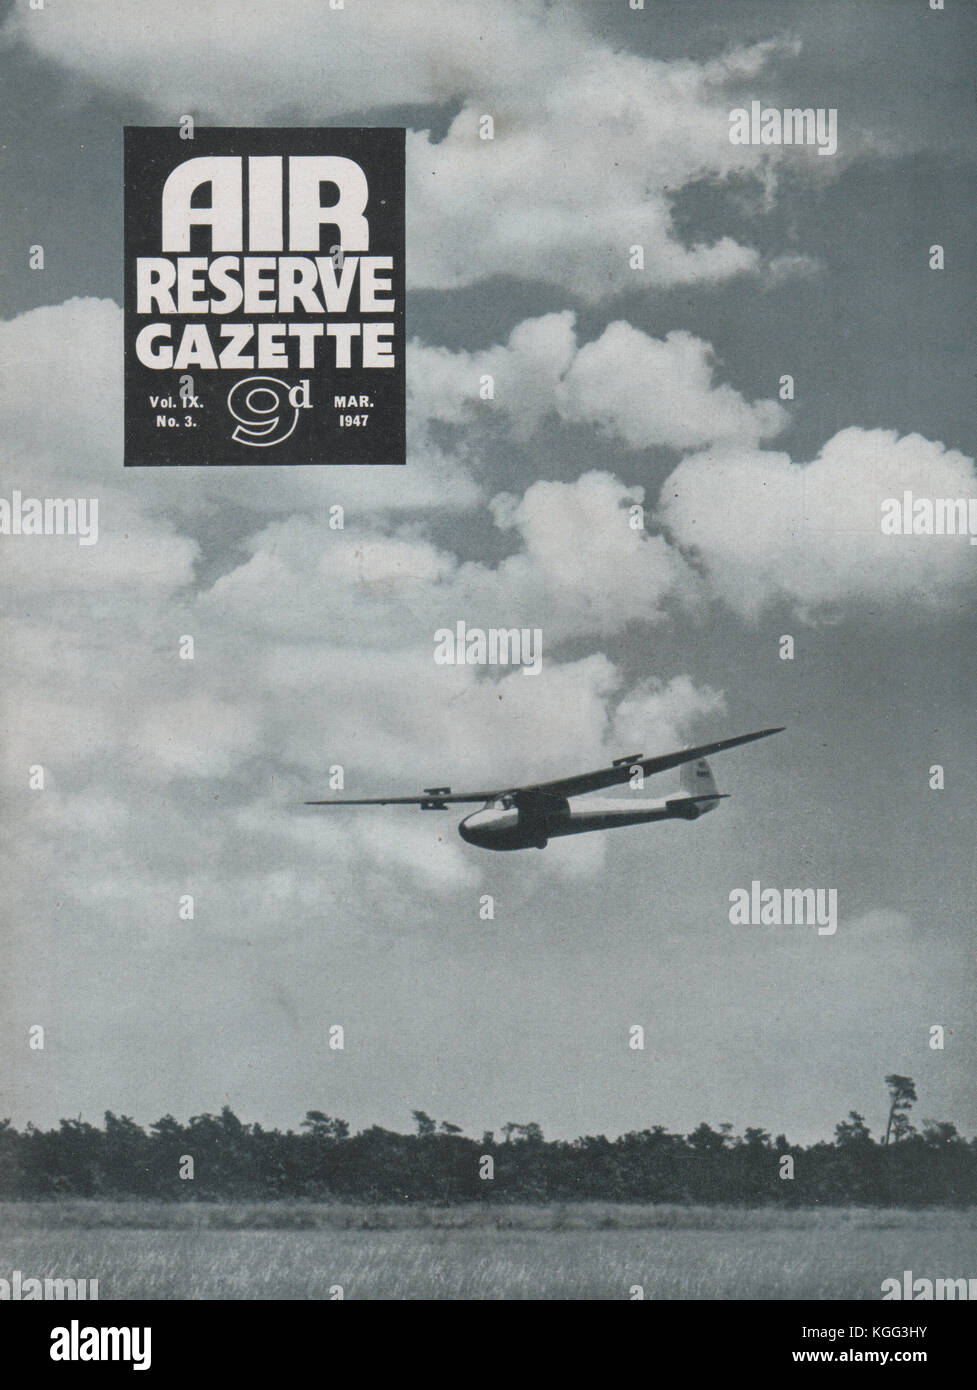 Vintage Air Reserve Gazette magazine cover dated March 1947 showing an Olympia sailplane or glider of the post war era Stock Photo